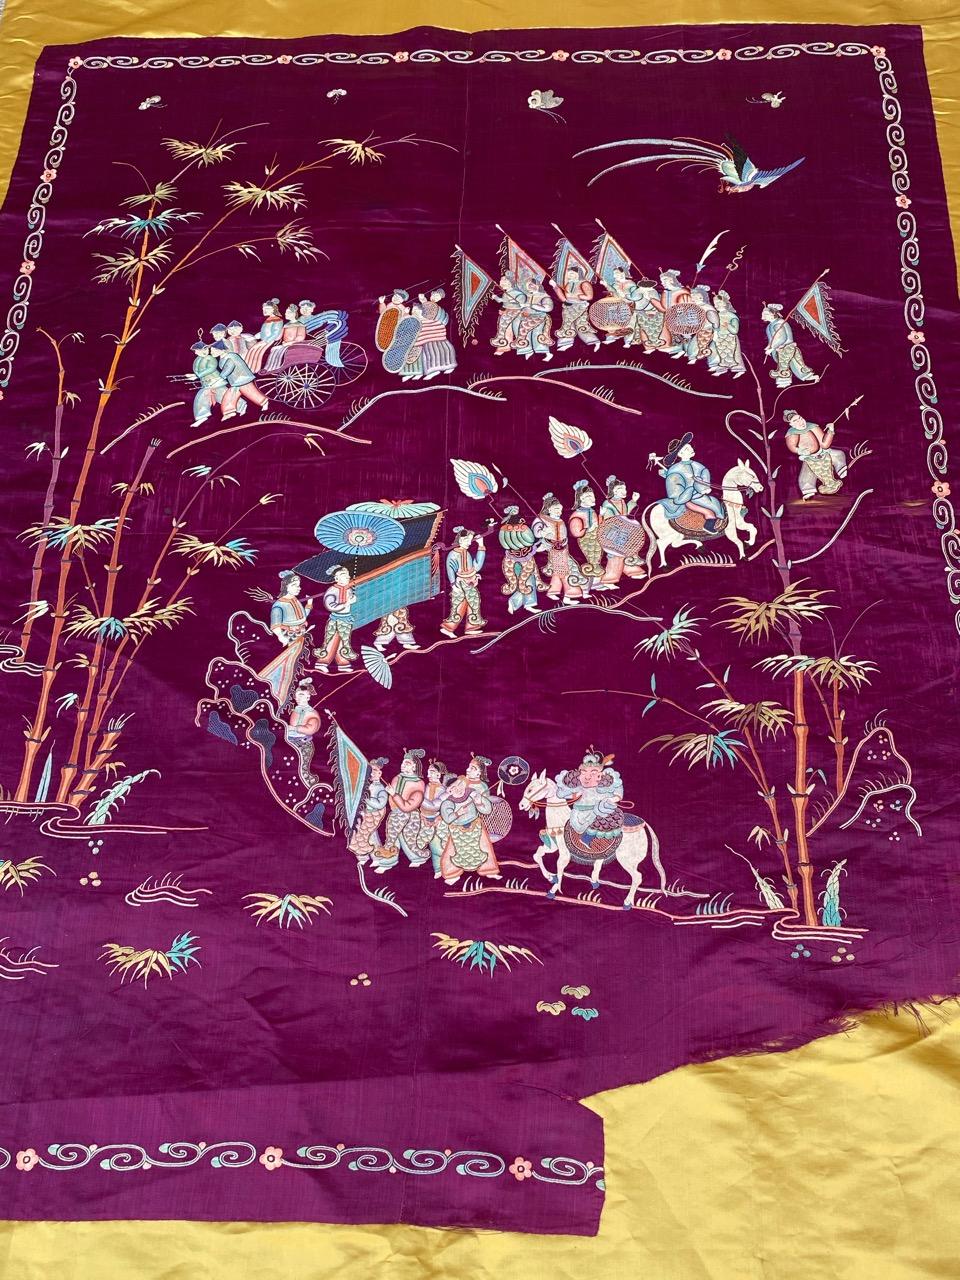 Very beautiful late 19th century embroidery from China with a beautiful Chinese design and beautiful colors, entirely hand embroidered with silk on silk foundation.

✨✨✨
